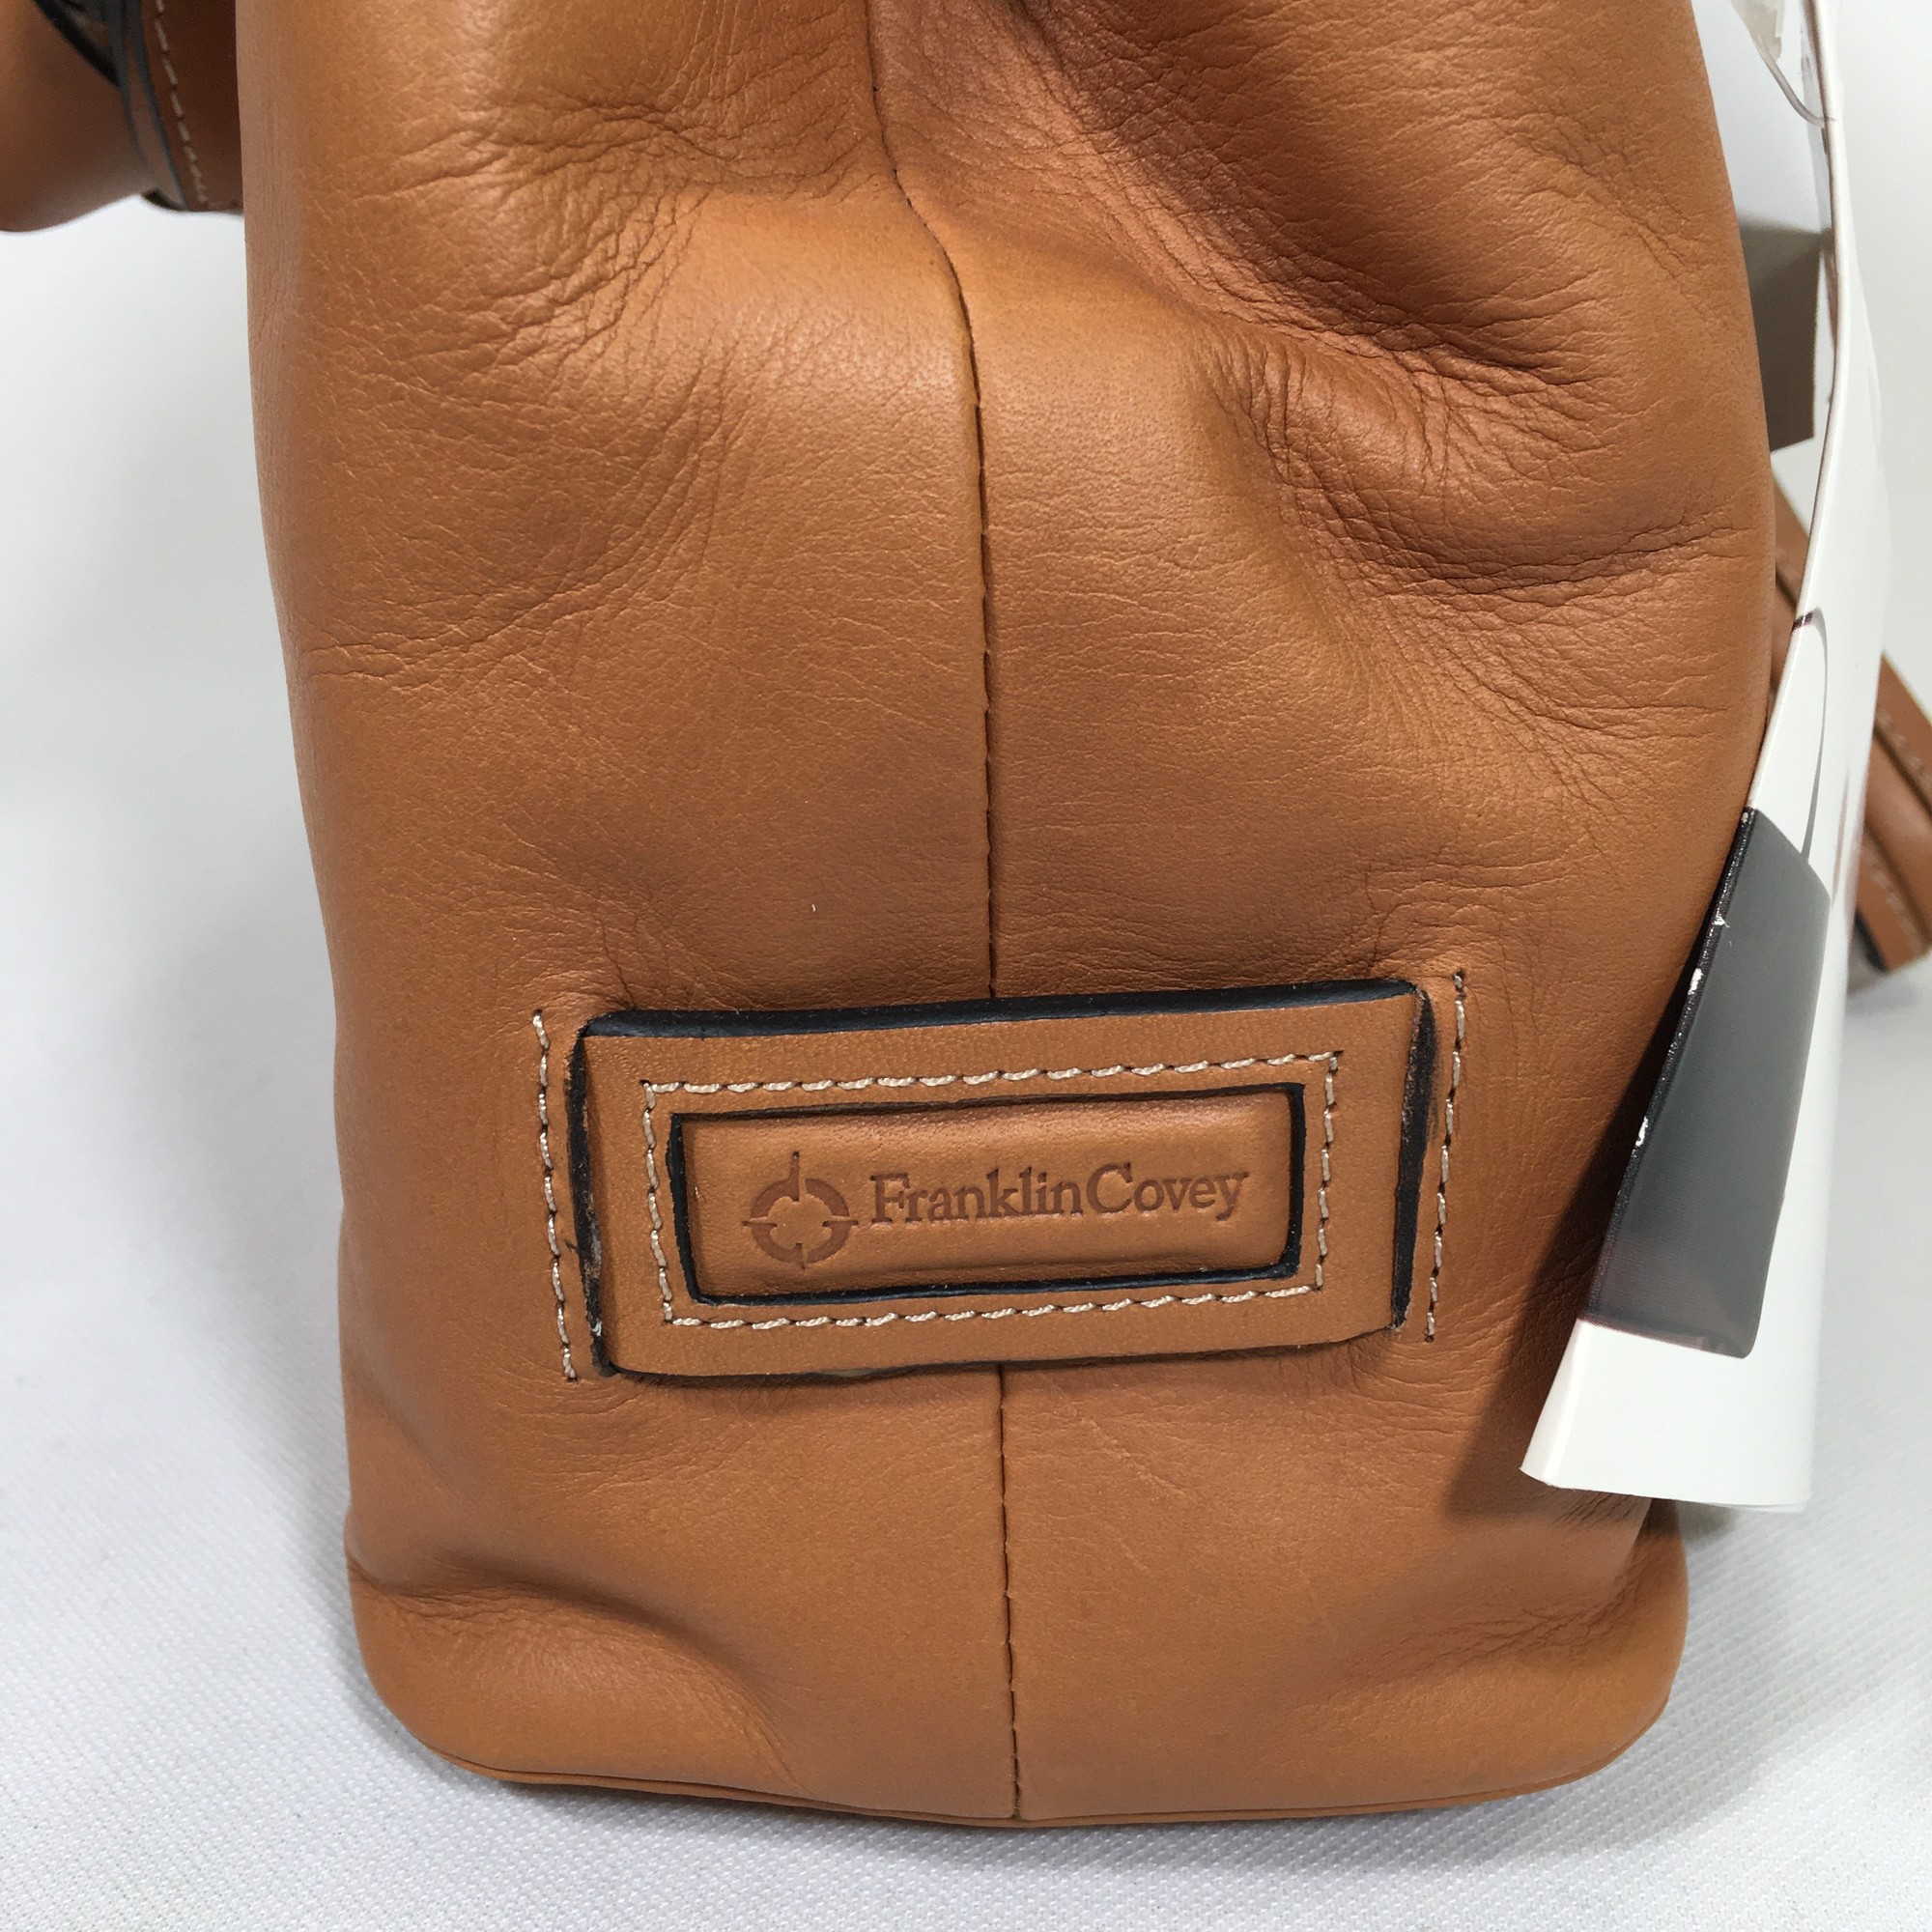 Franklin Covey, Bags, Franklin Covey Leather Purse